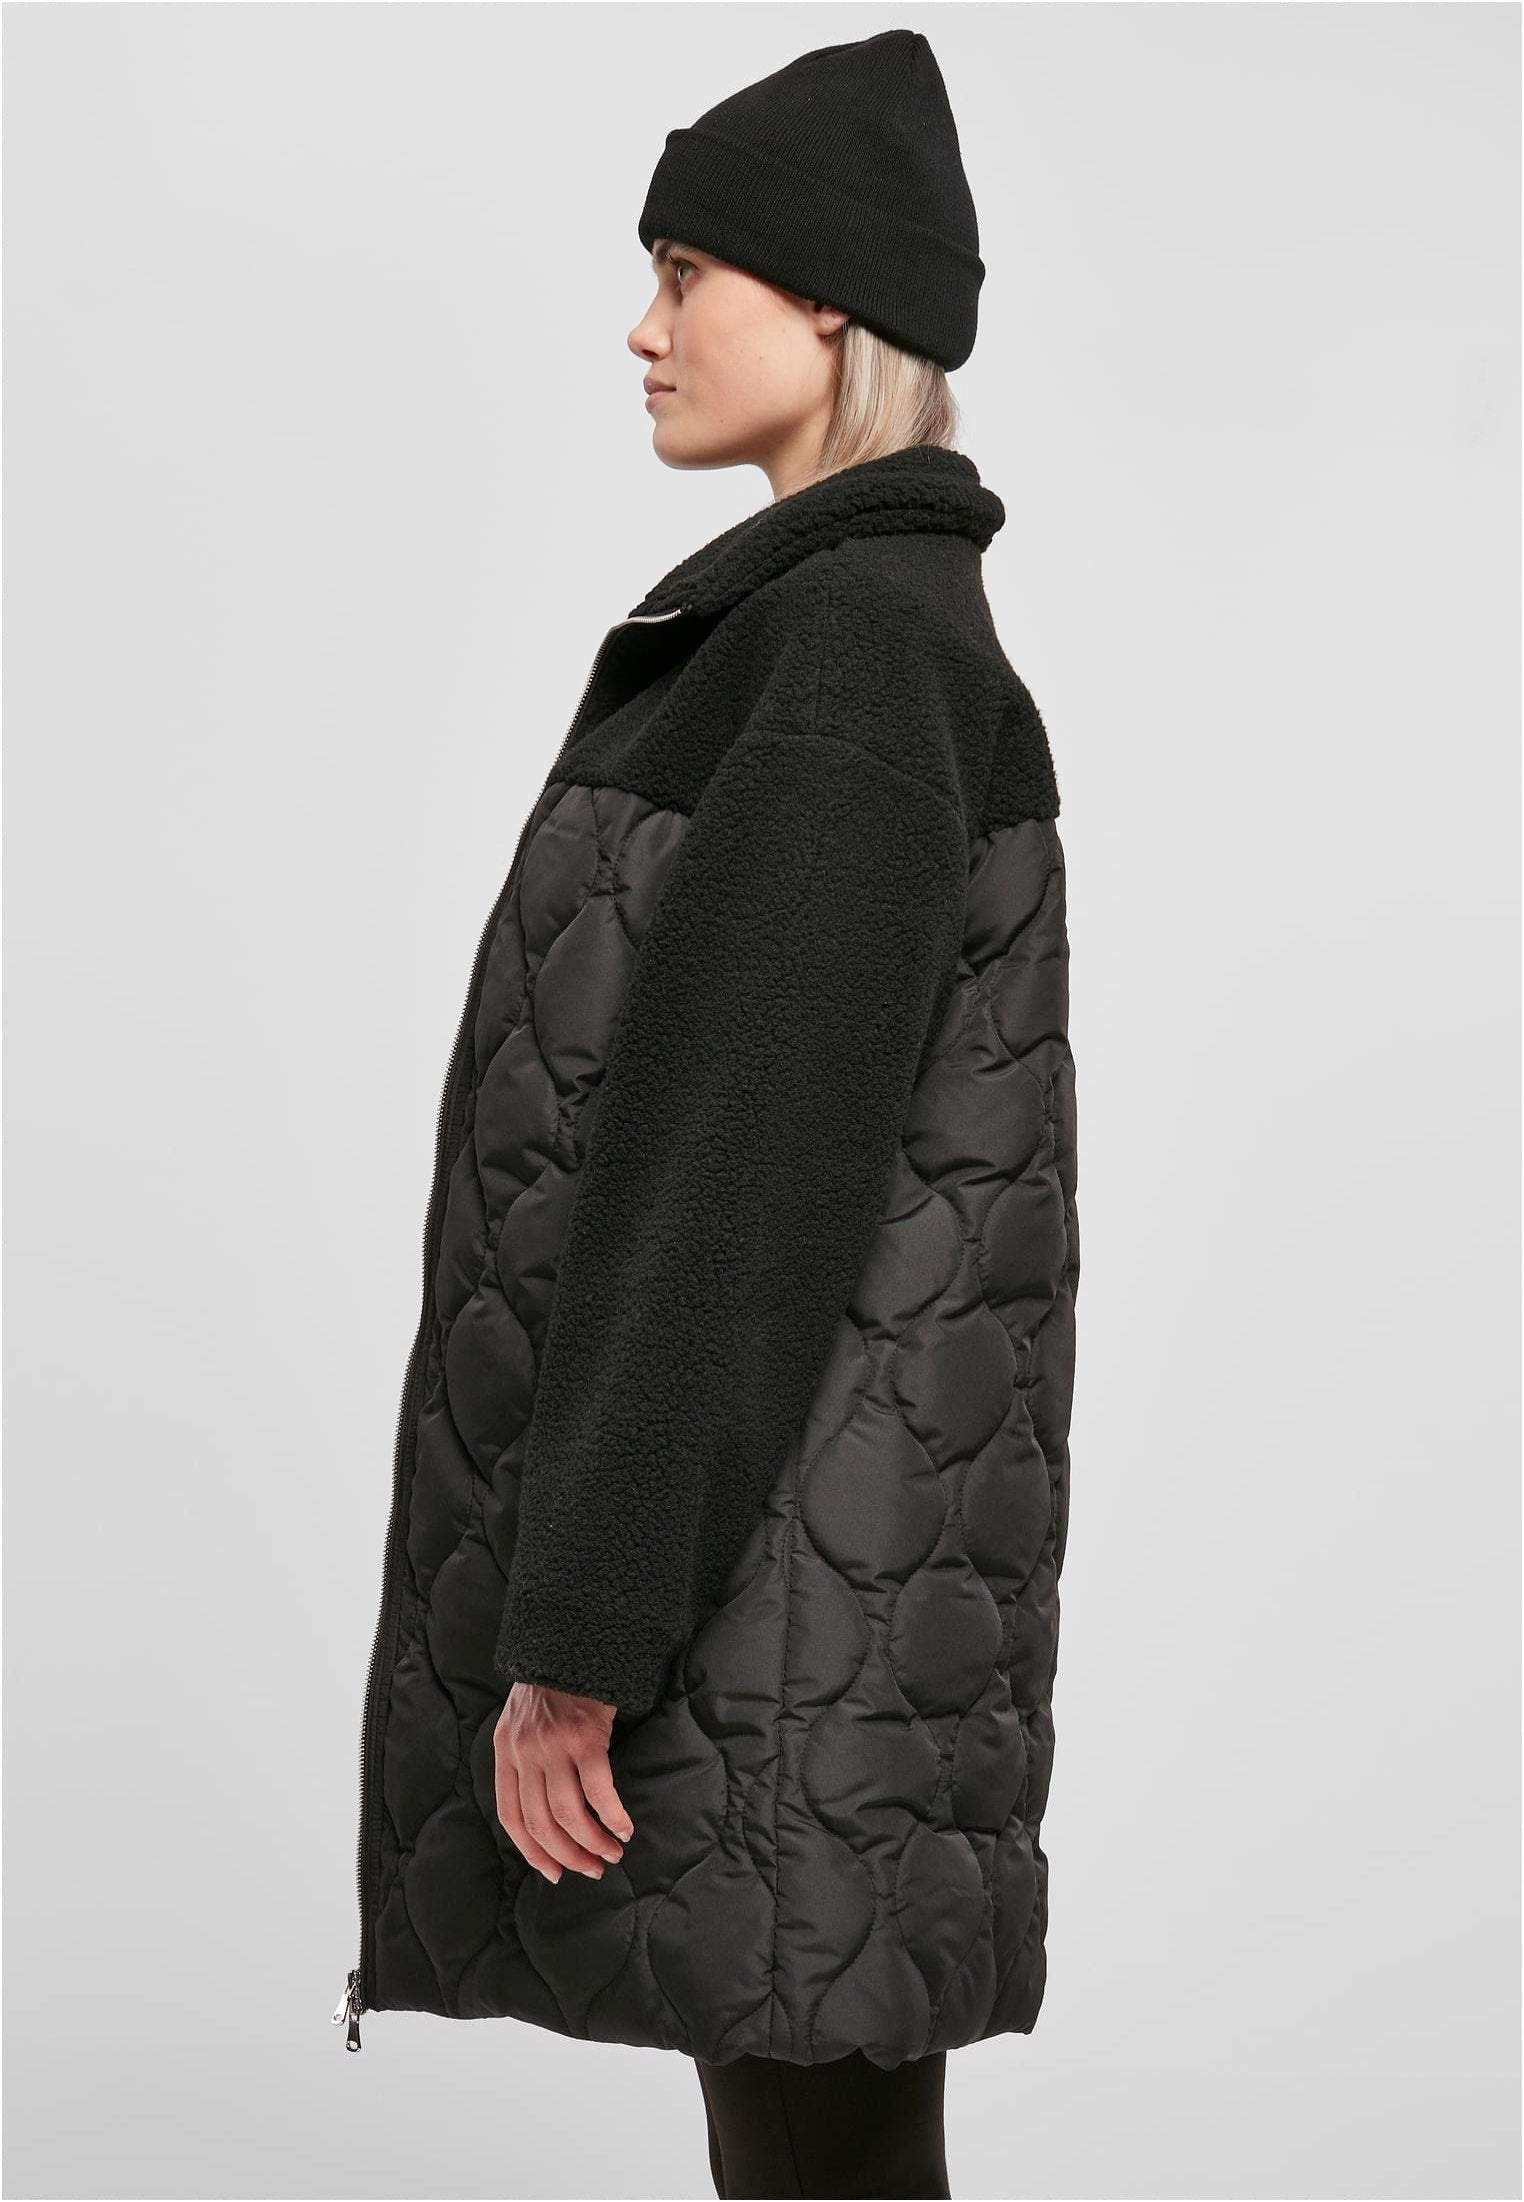 Urban Classics - Ladies Oversized Sherpa Quilted Black - Jacket